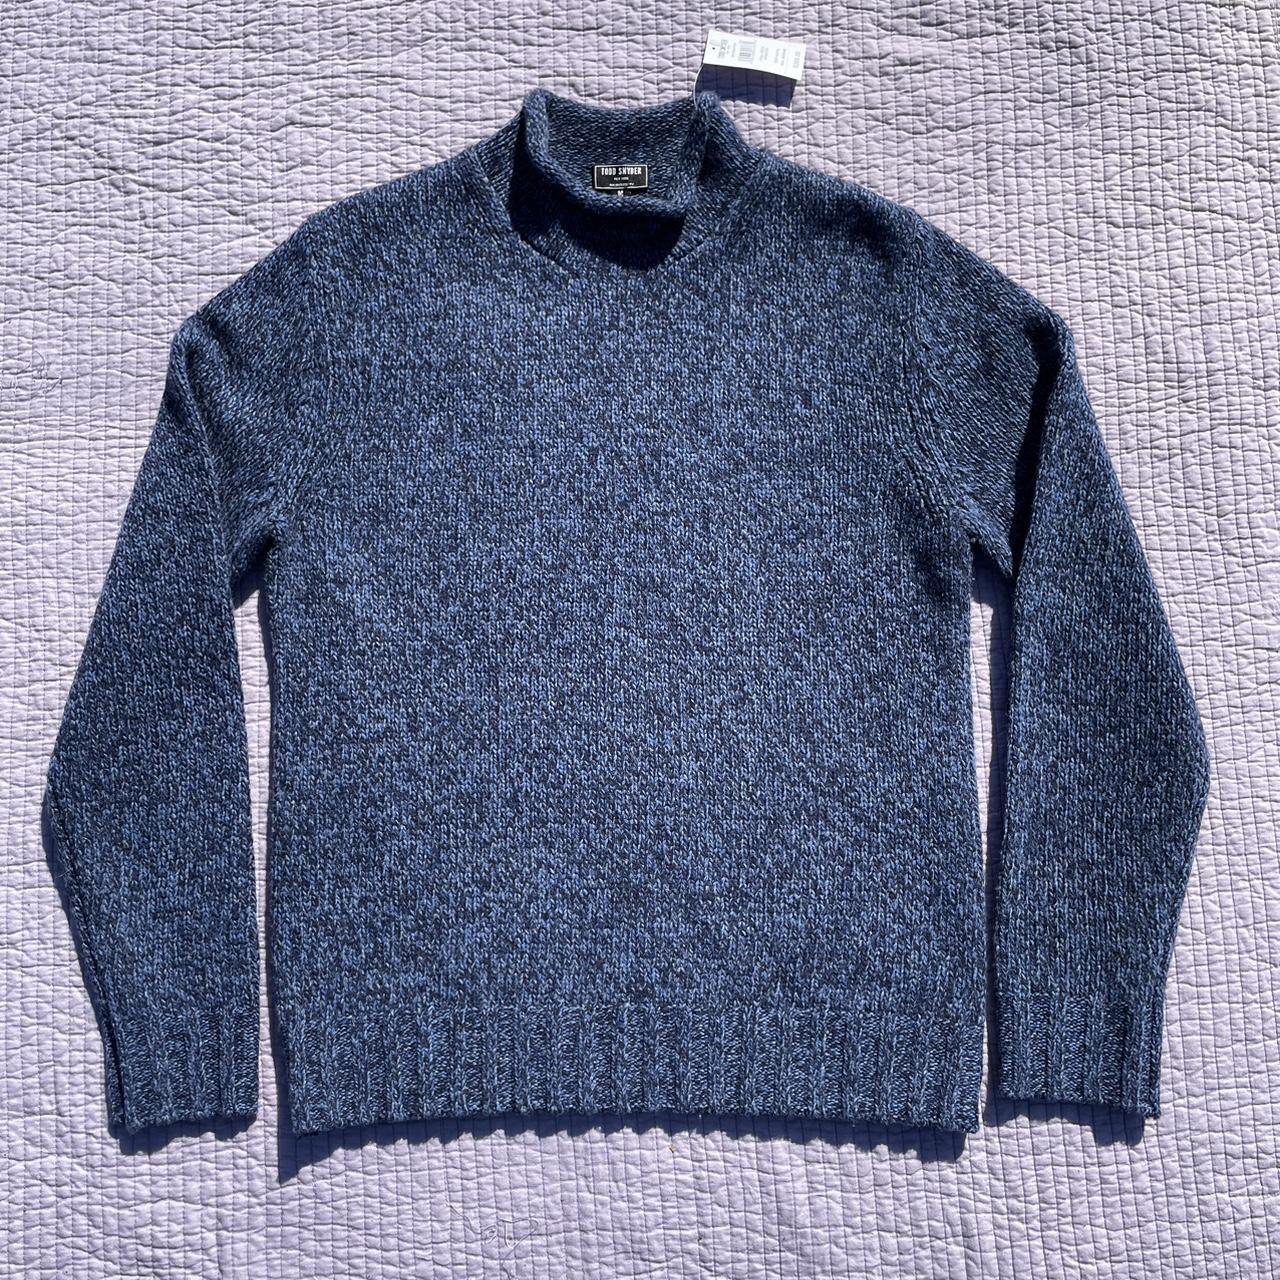 NWT Todd Snyder blue roll neck sweater! Retailed... - Depop